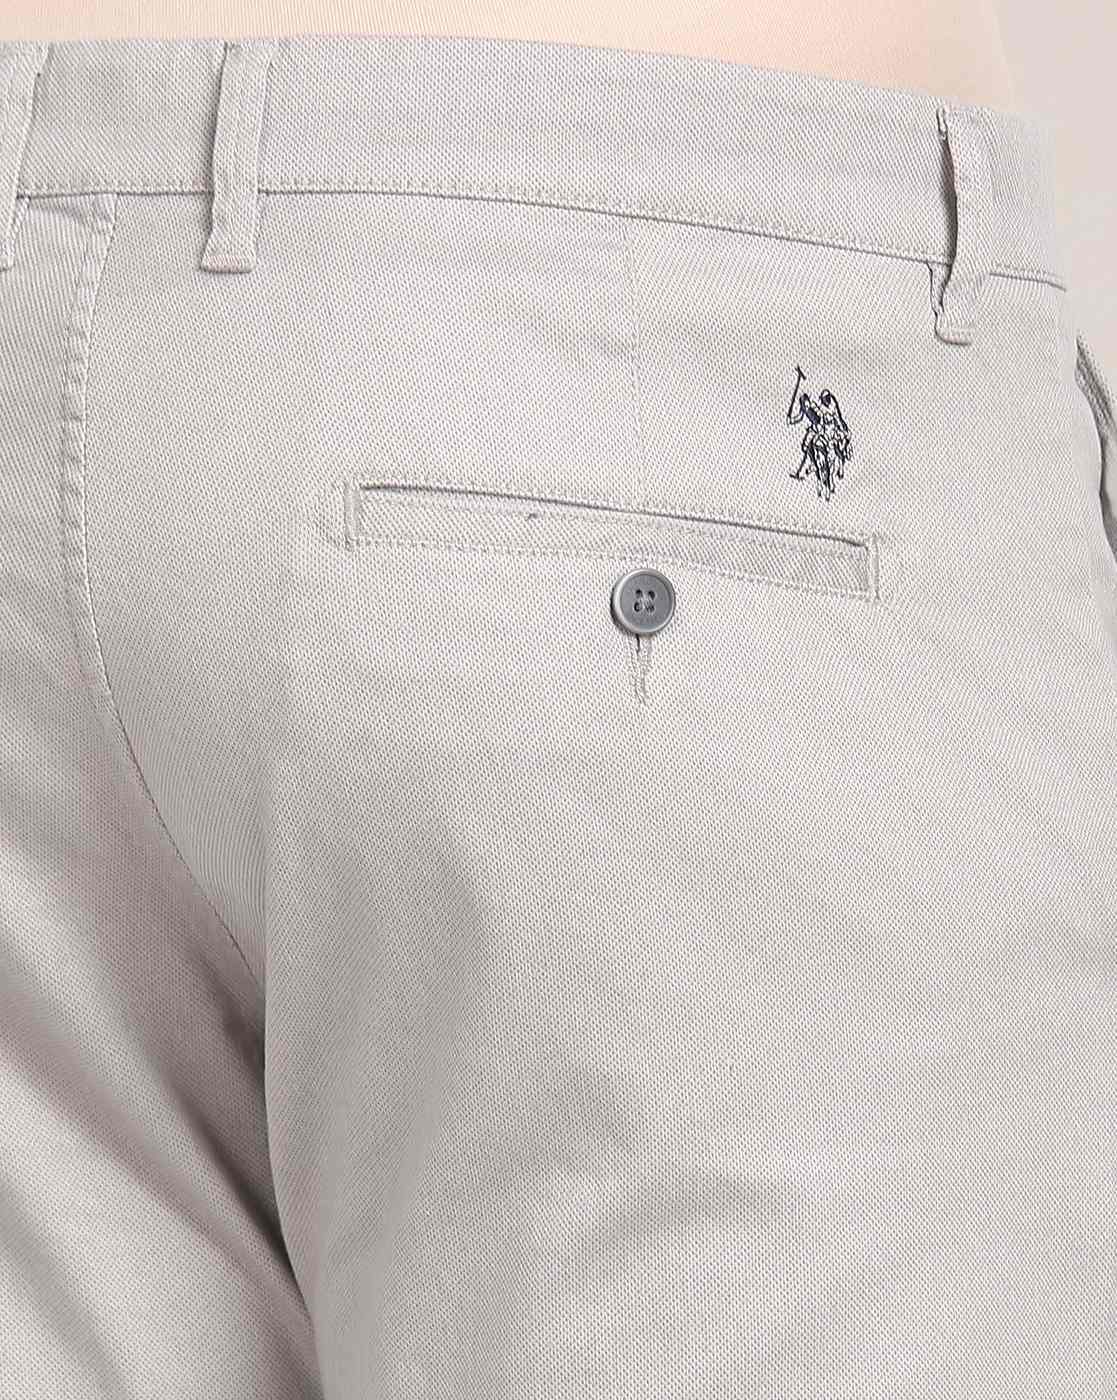 U.S. Polo Assn. Light Brown Slim Fit Chinos